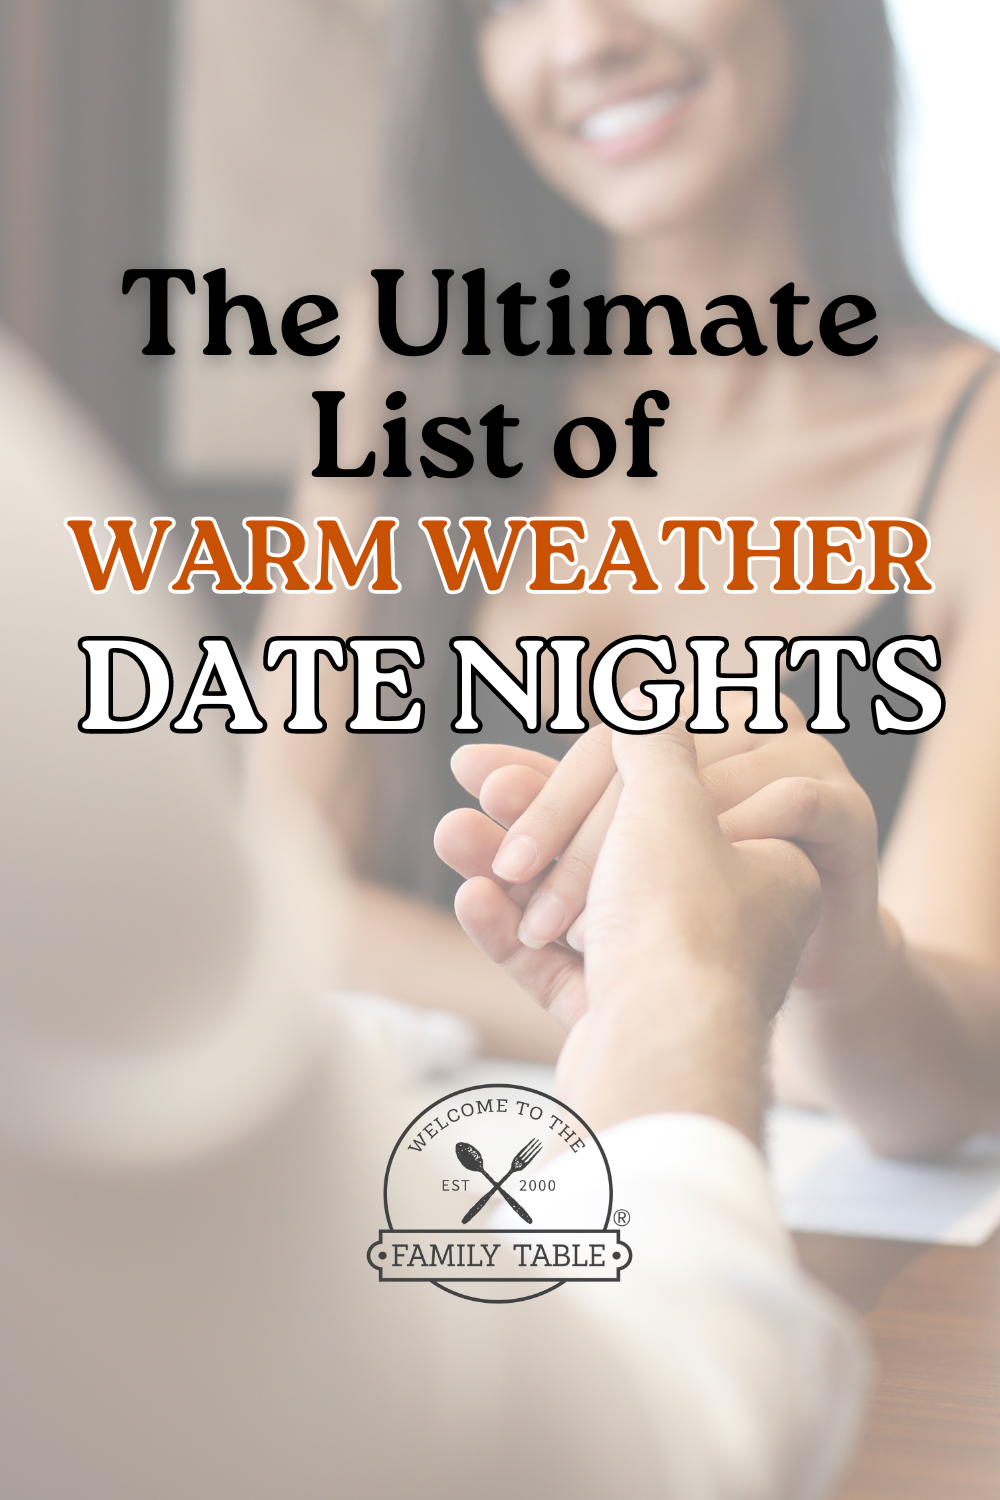 The Ultimate List of Warm Weather Date Nights